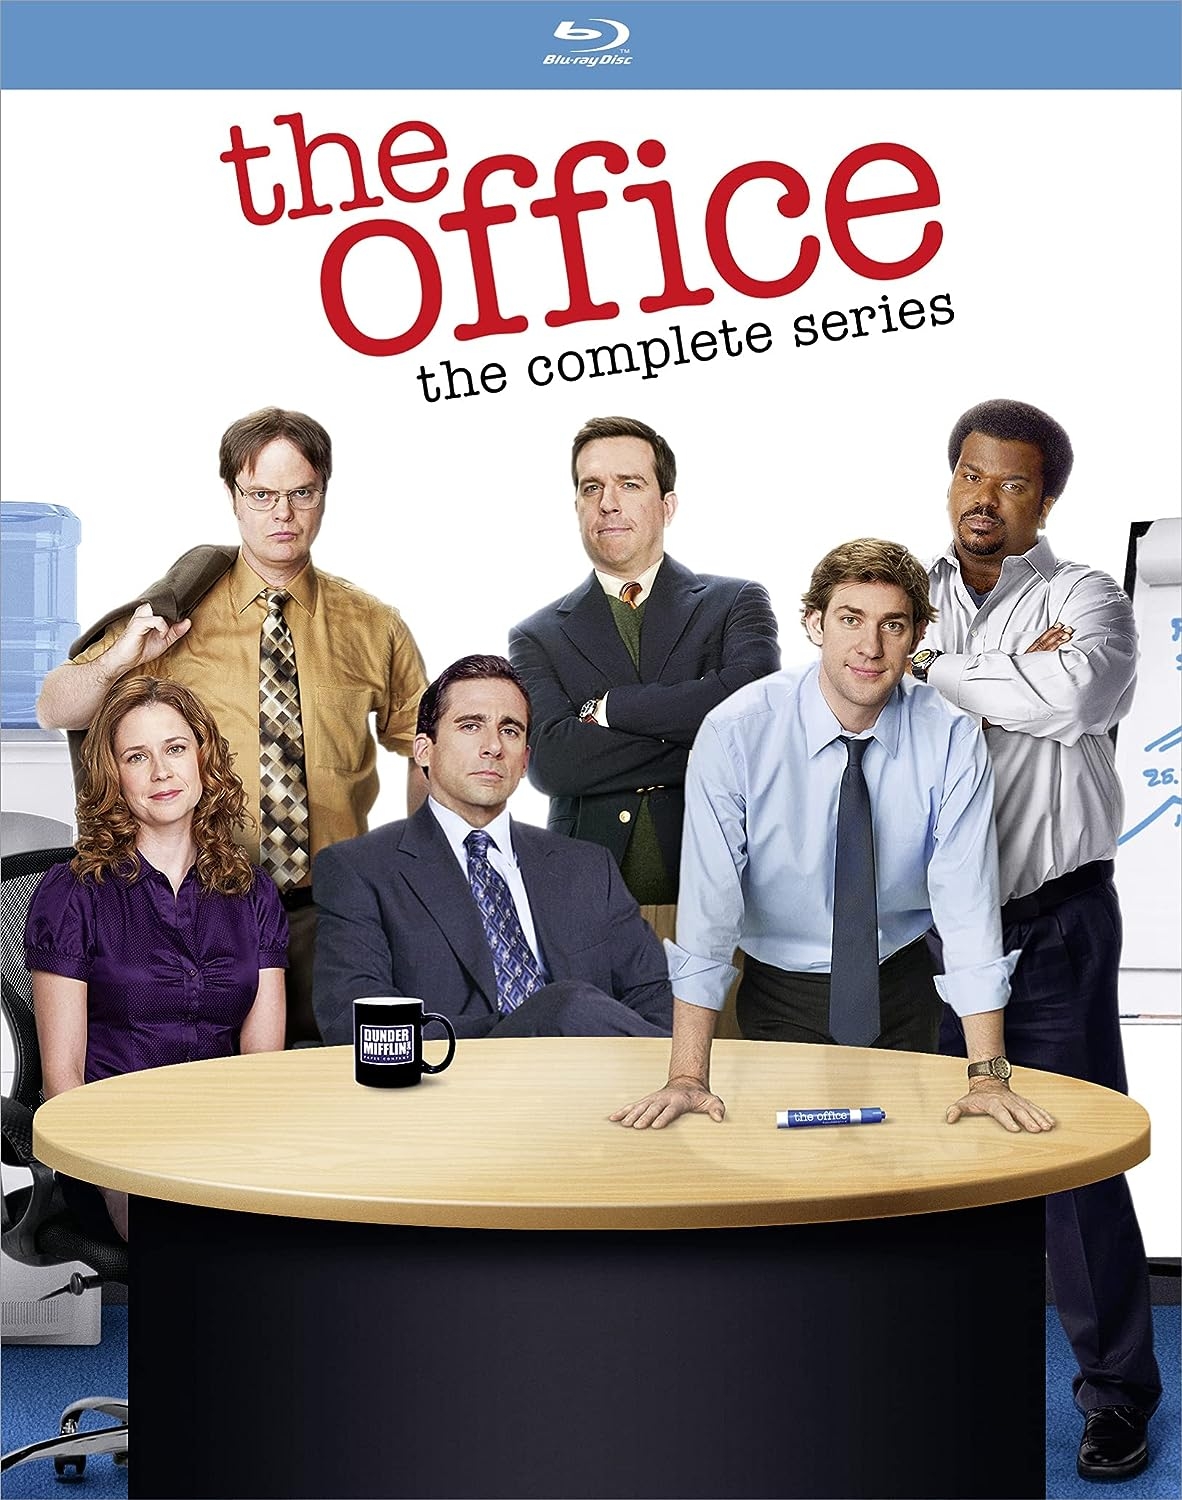 The Office: The Complete Series [Blu-ray]   price checker   price checker Description Gallery Reviews Variations Additional